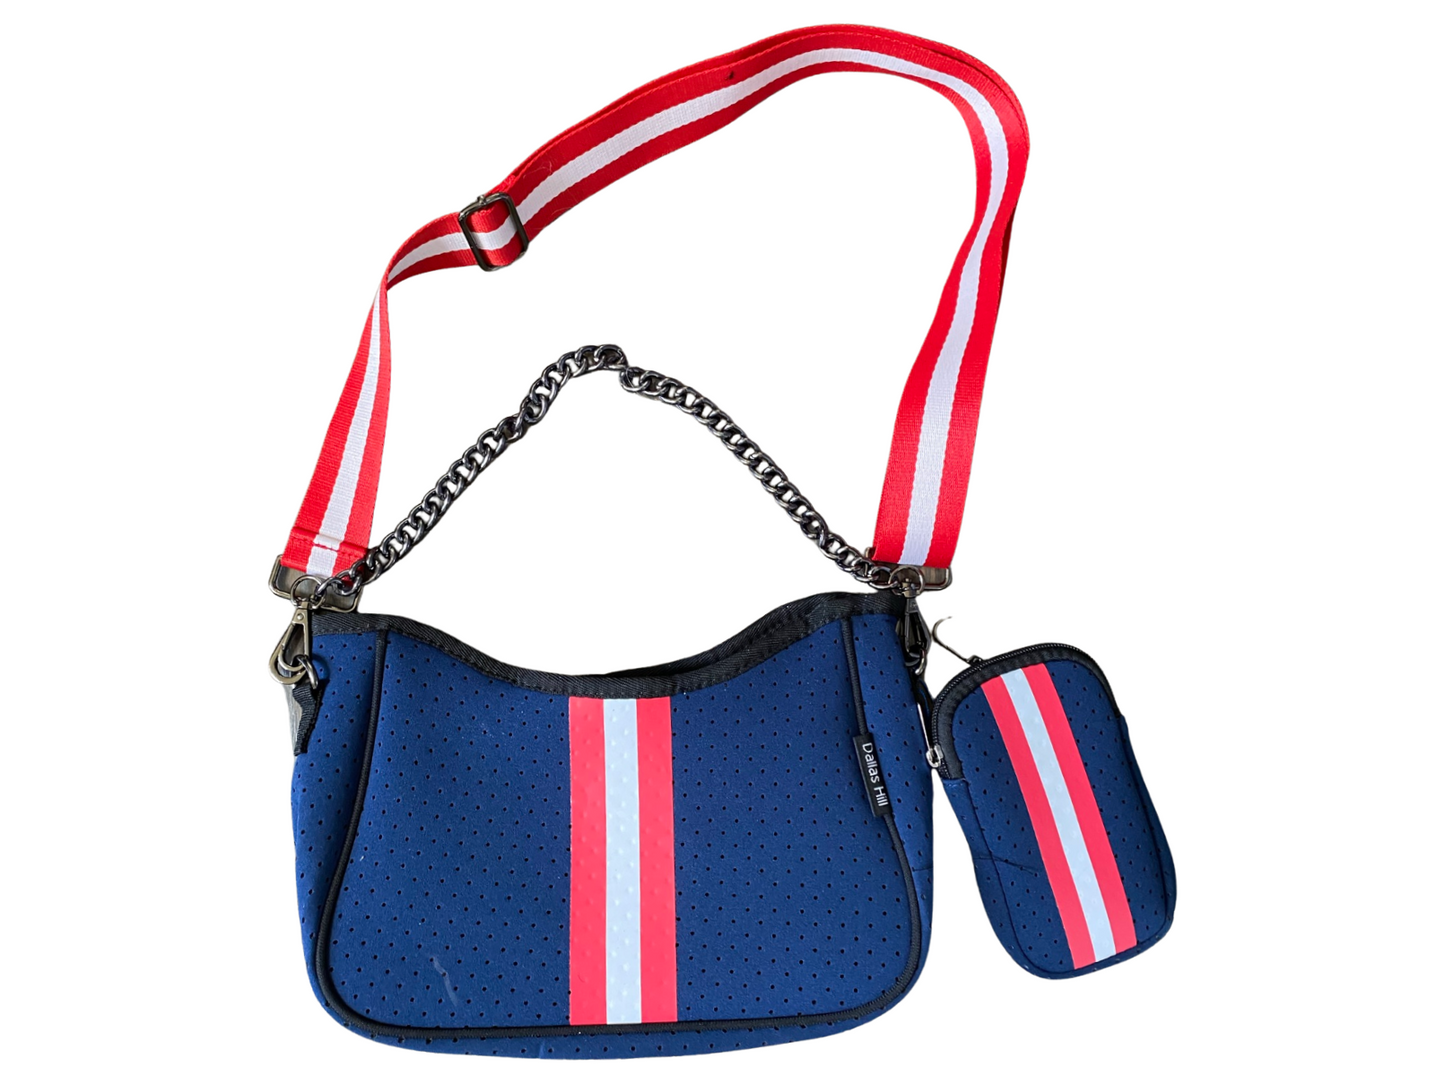 Crossbody Neoprene Purse Red White & Blue stars inside with Chain & Adjustable/Removable Strap & Extra Pouch